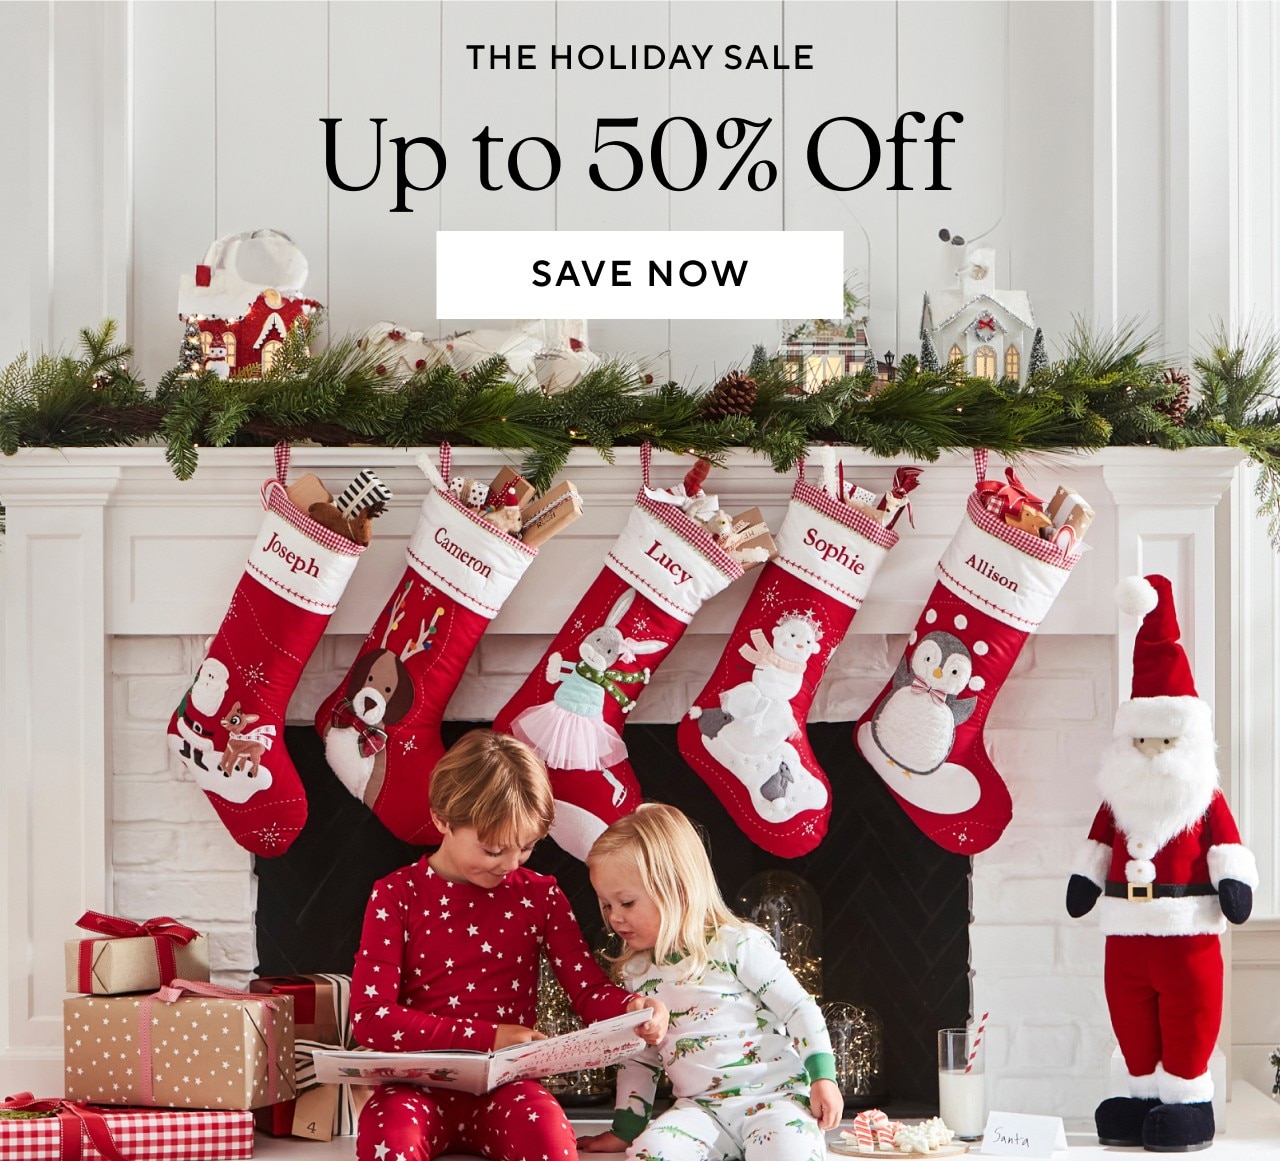 THE HOLIDAY SALE - UP TO 50% OFF